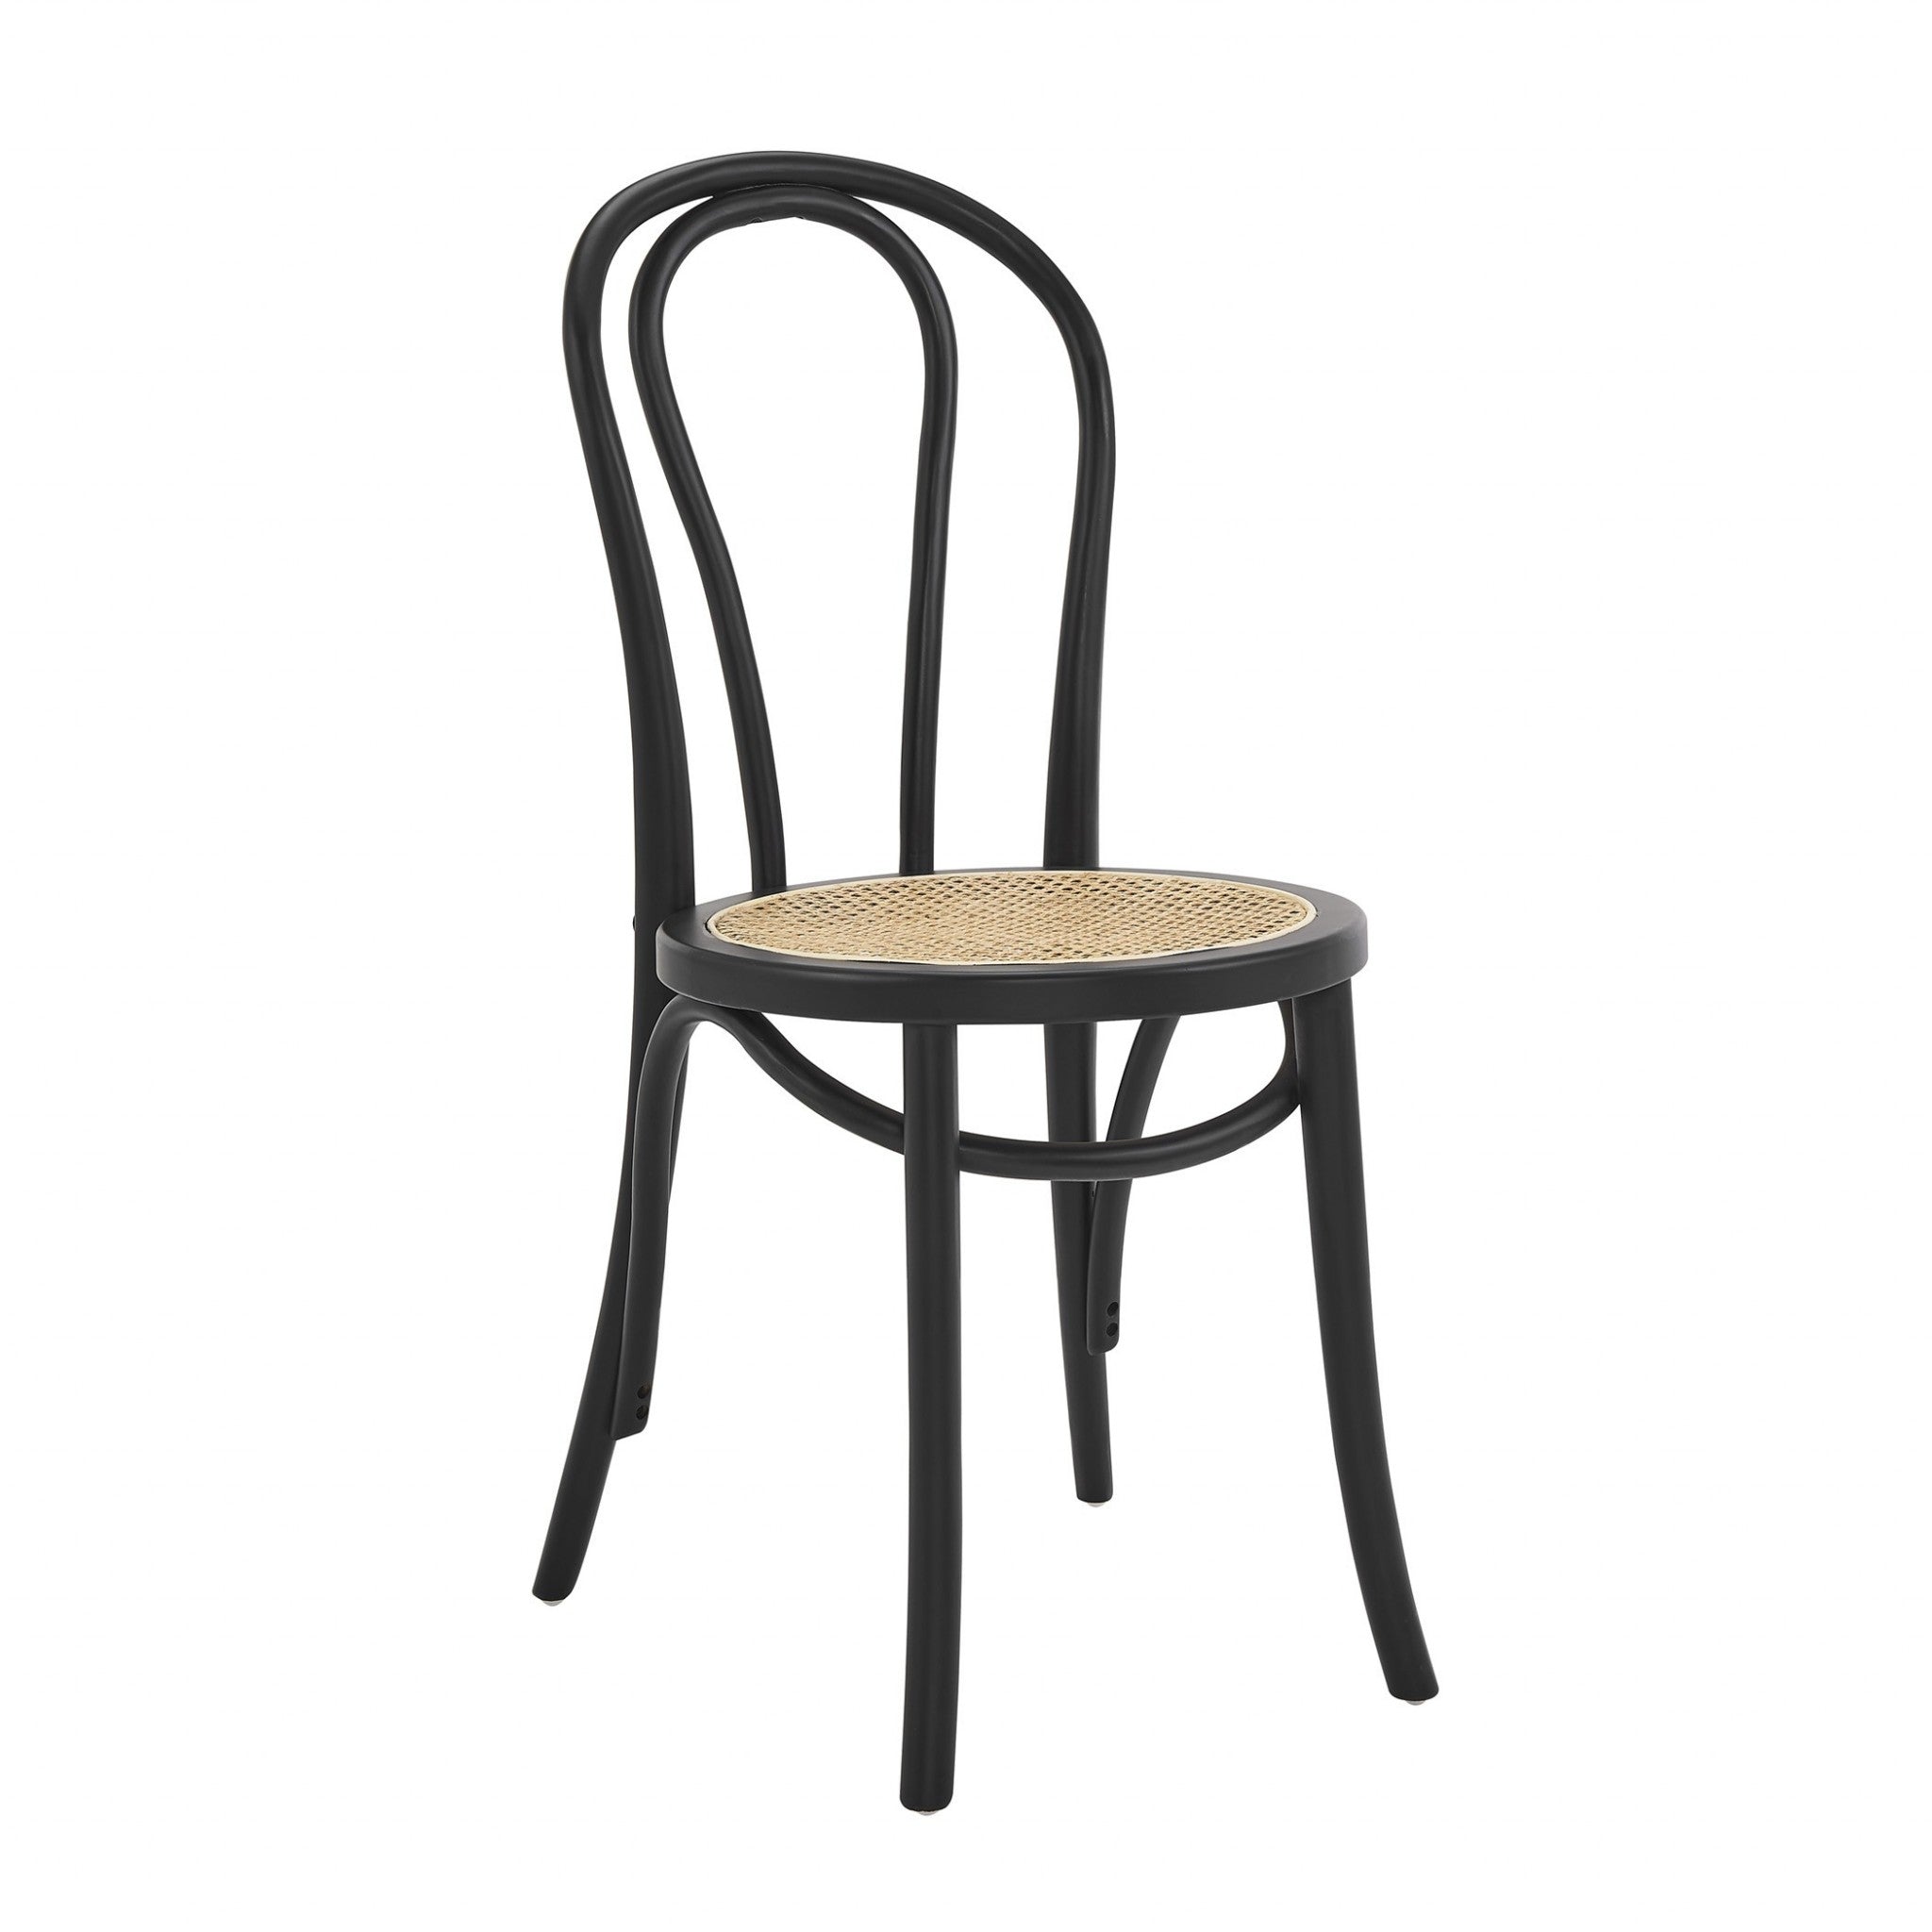 Set of Two Vintage Style Black Cane Dining Chairs